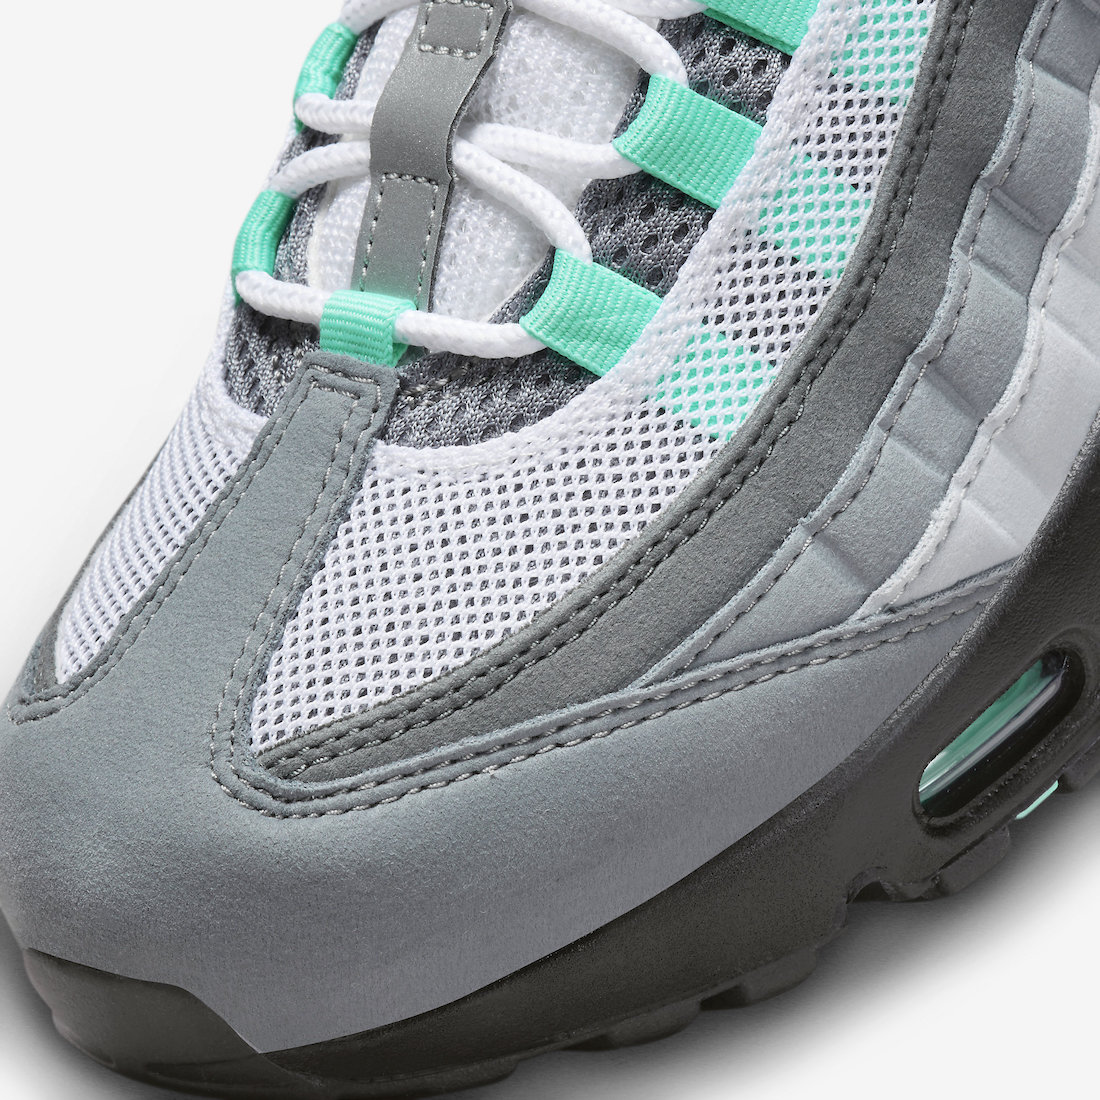 Nike Air Max 95 Hyper Turquoise FV4710 100 6